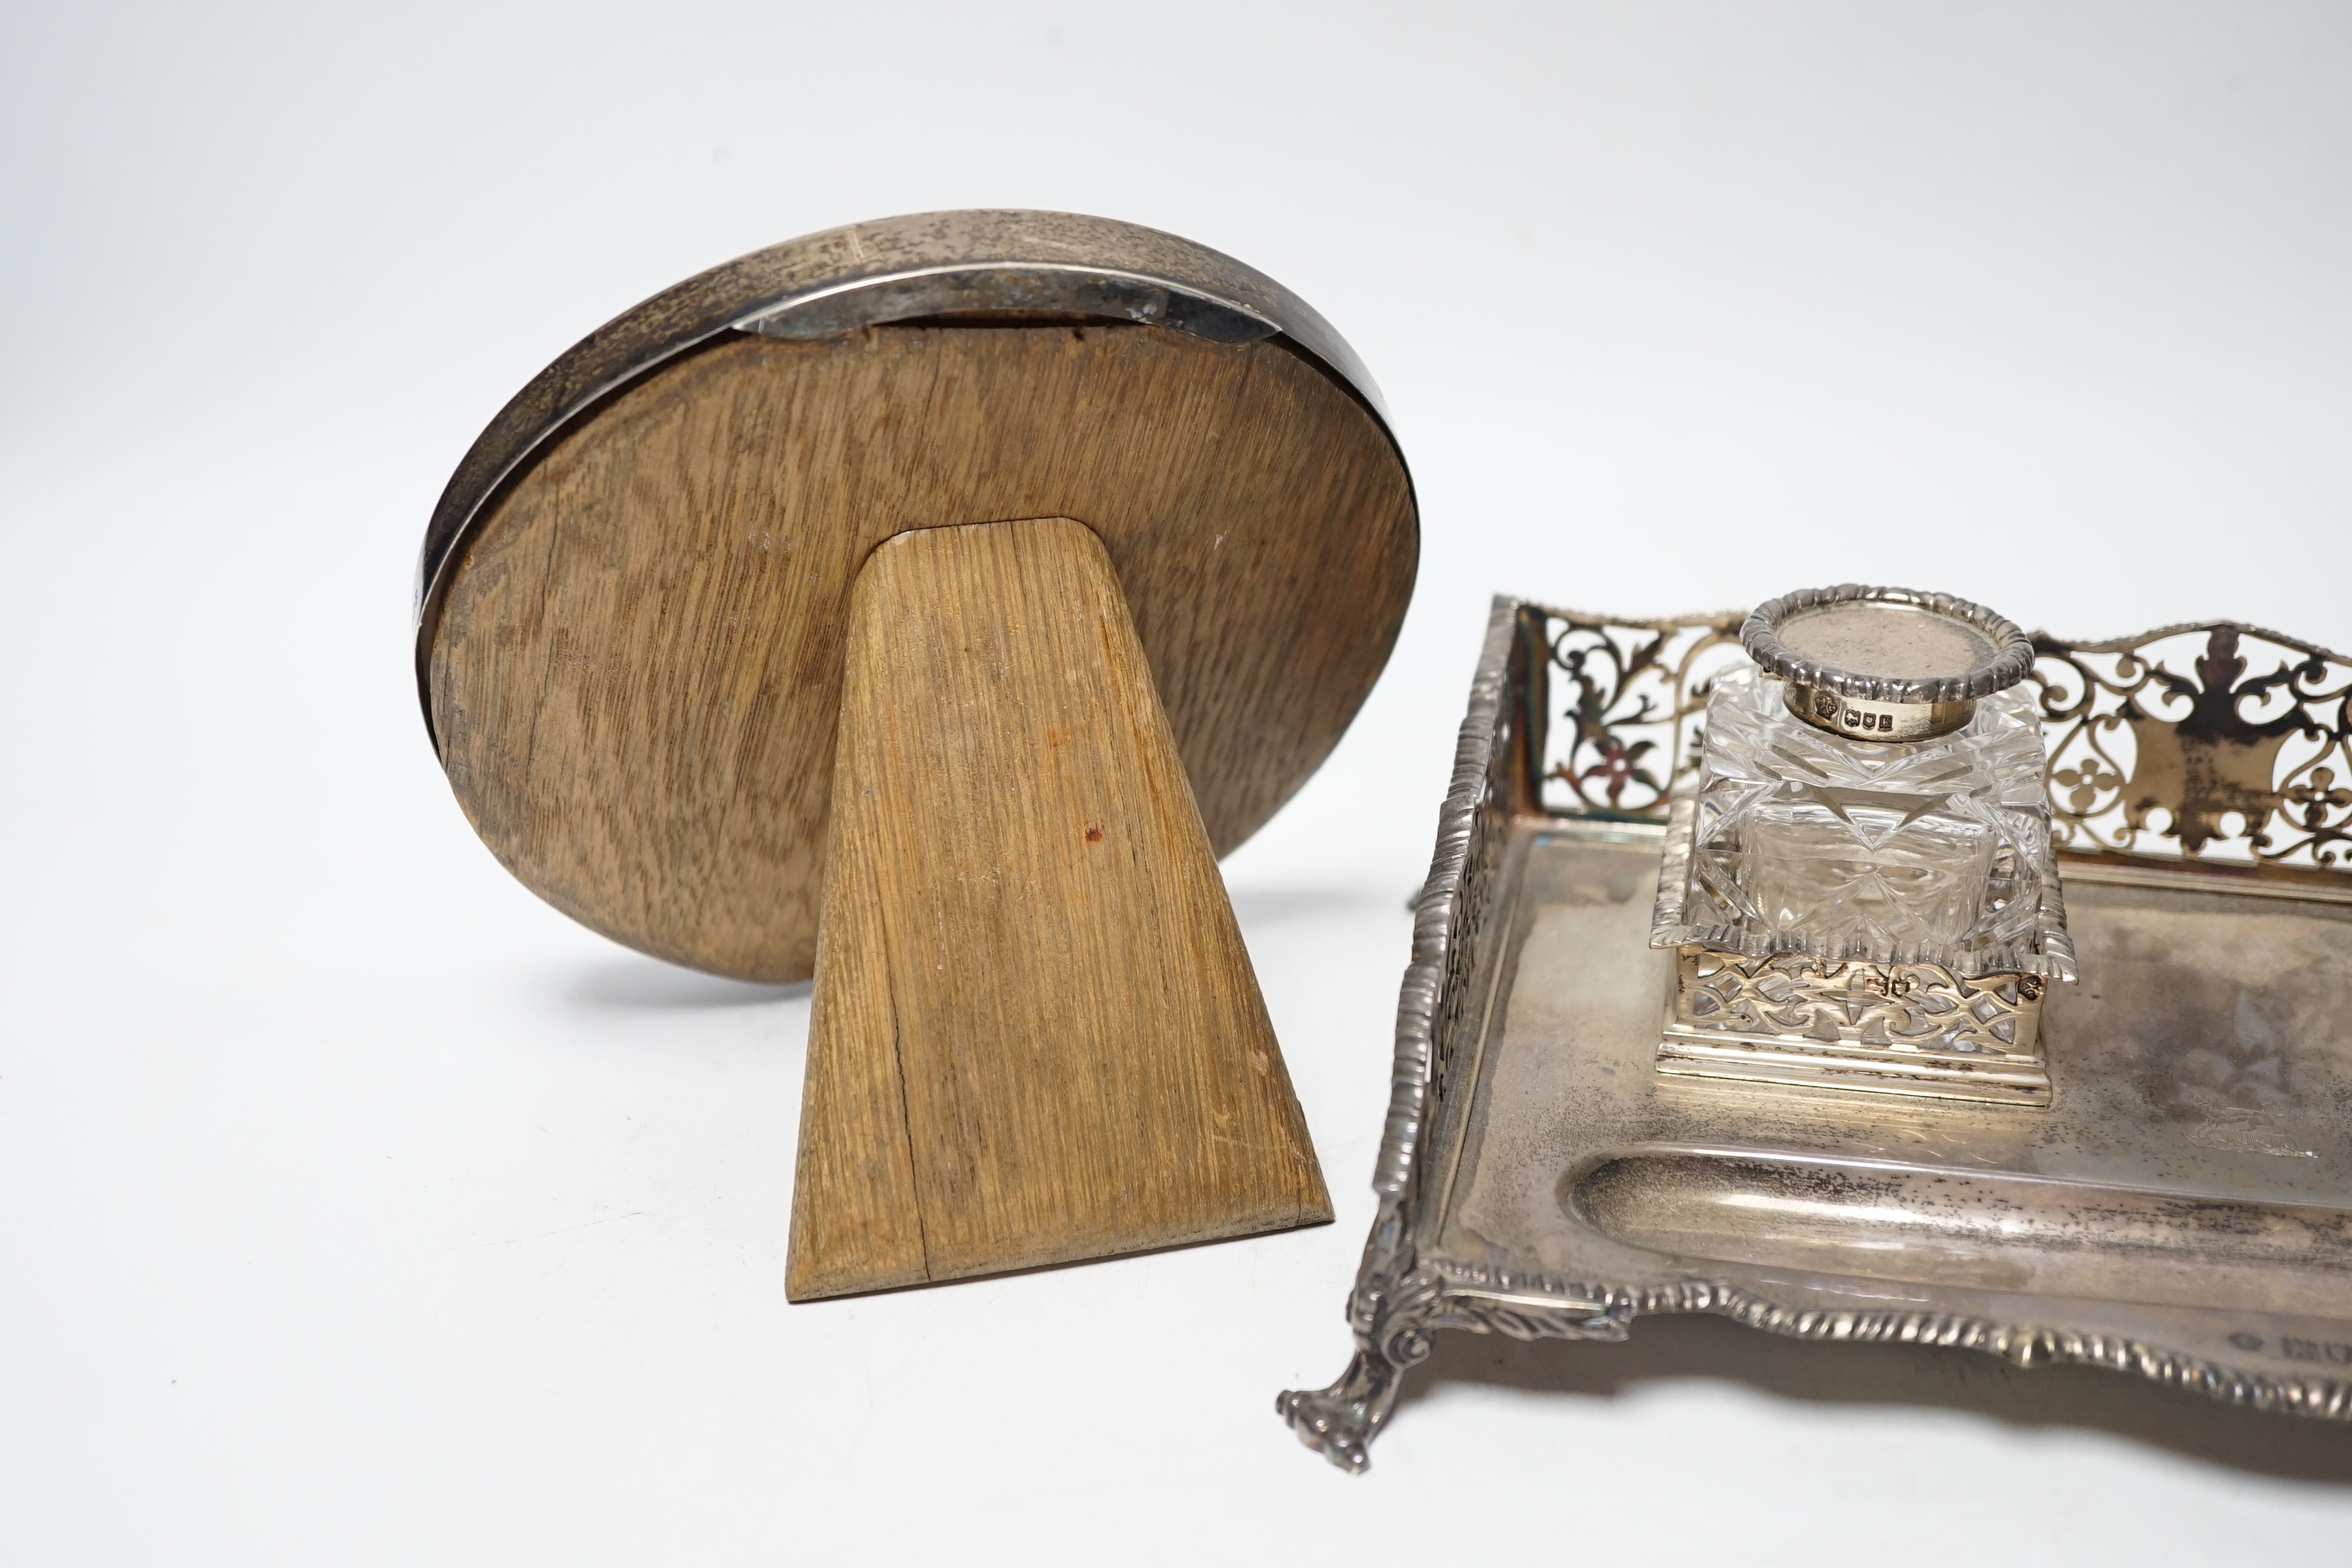 An Edwardian silver rectangular inkstand with pierced three quarter gallery and two mounted cut glass wells, William Hutton & Sons Ltd, London, 1905, 22.3cm and a George V silver mounted circular photograph frame.